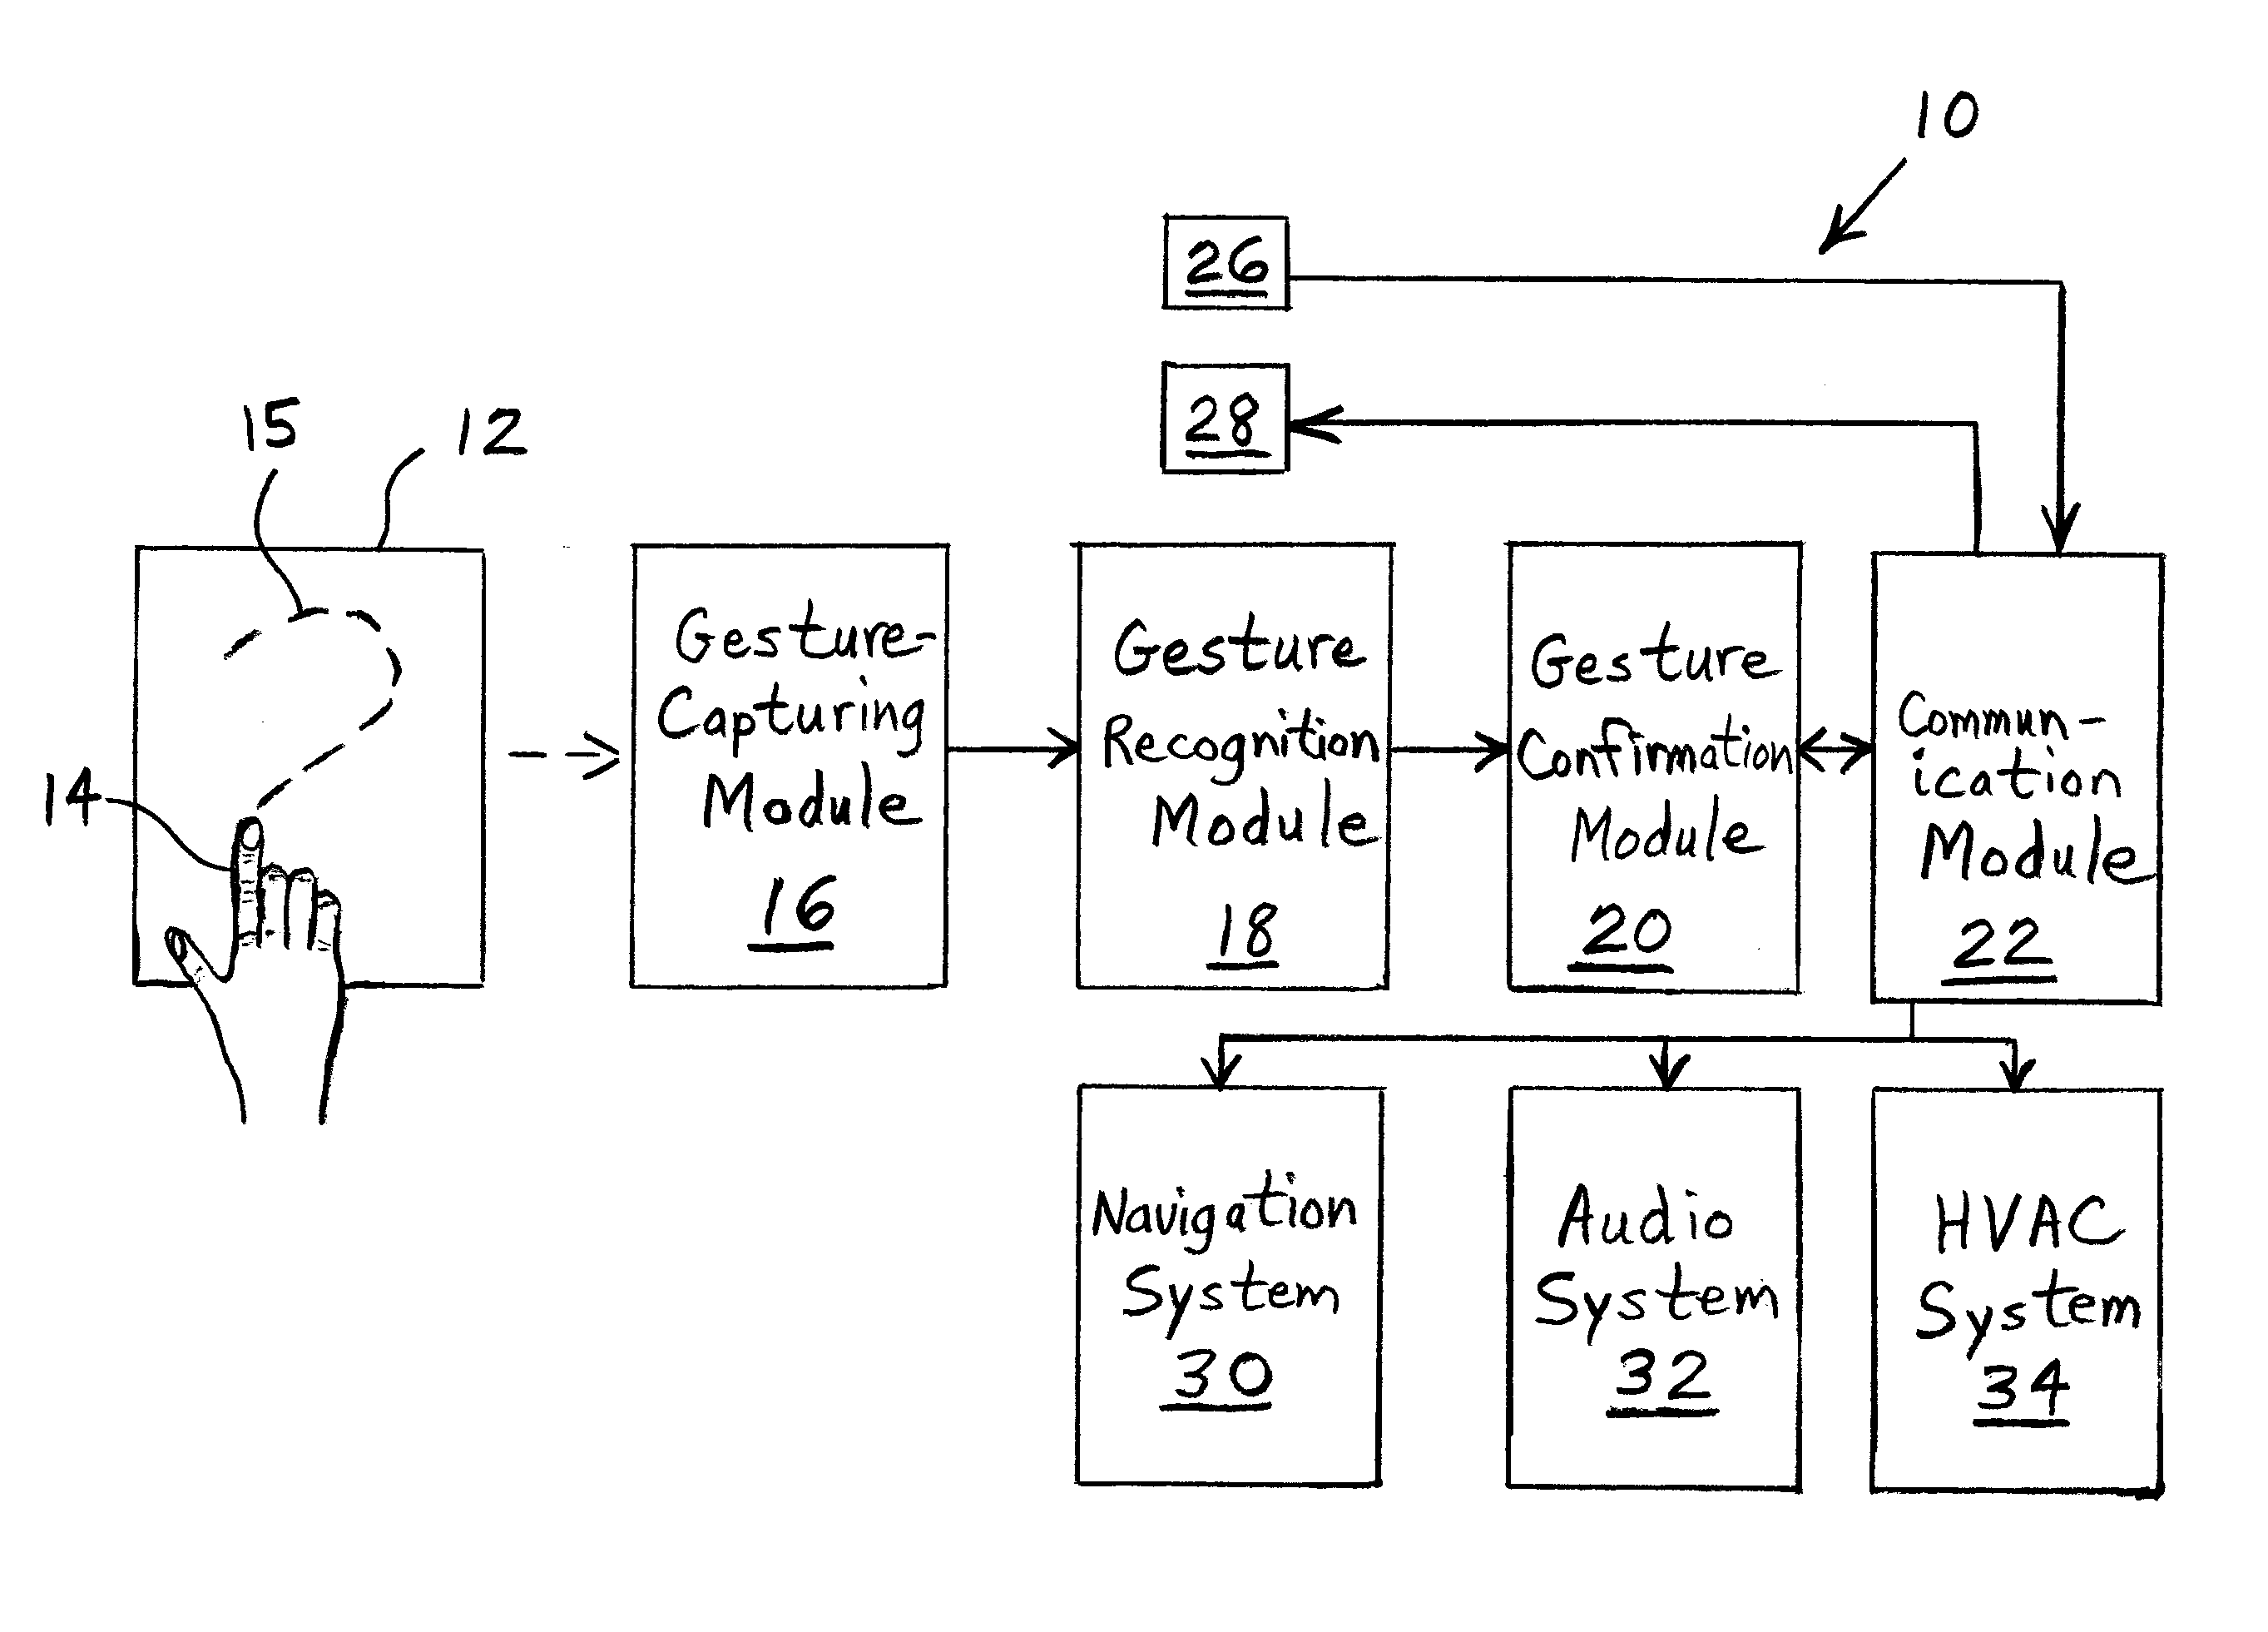 Gesture-based information and command entry for motor vehicle